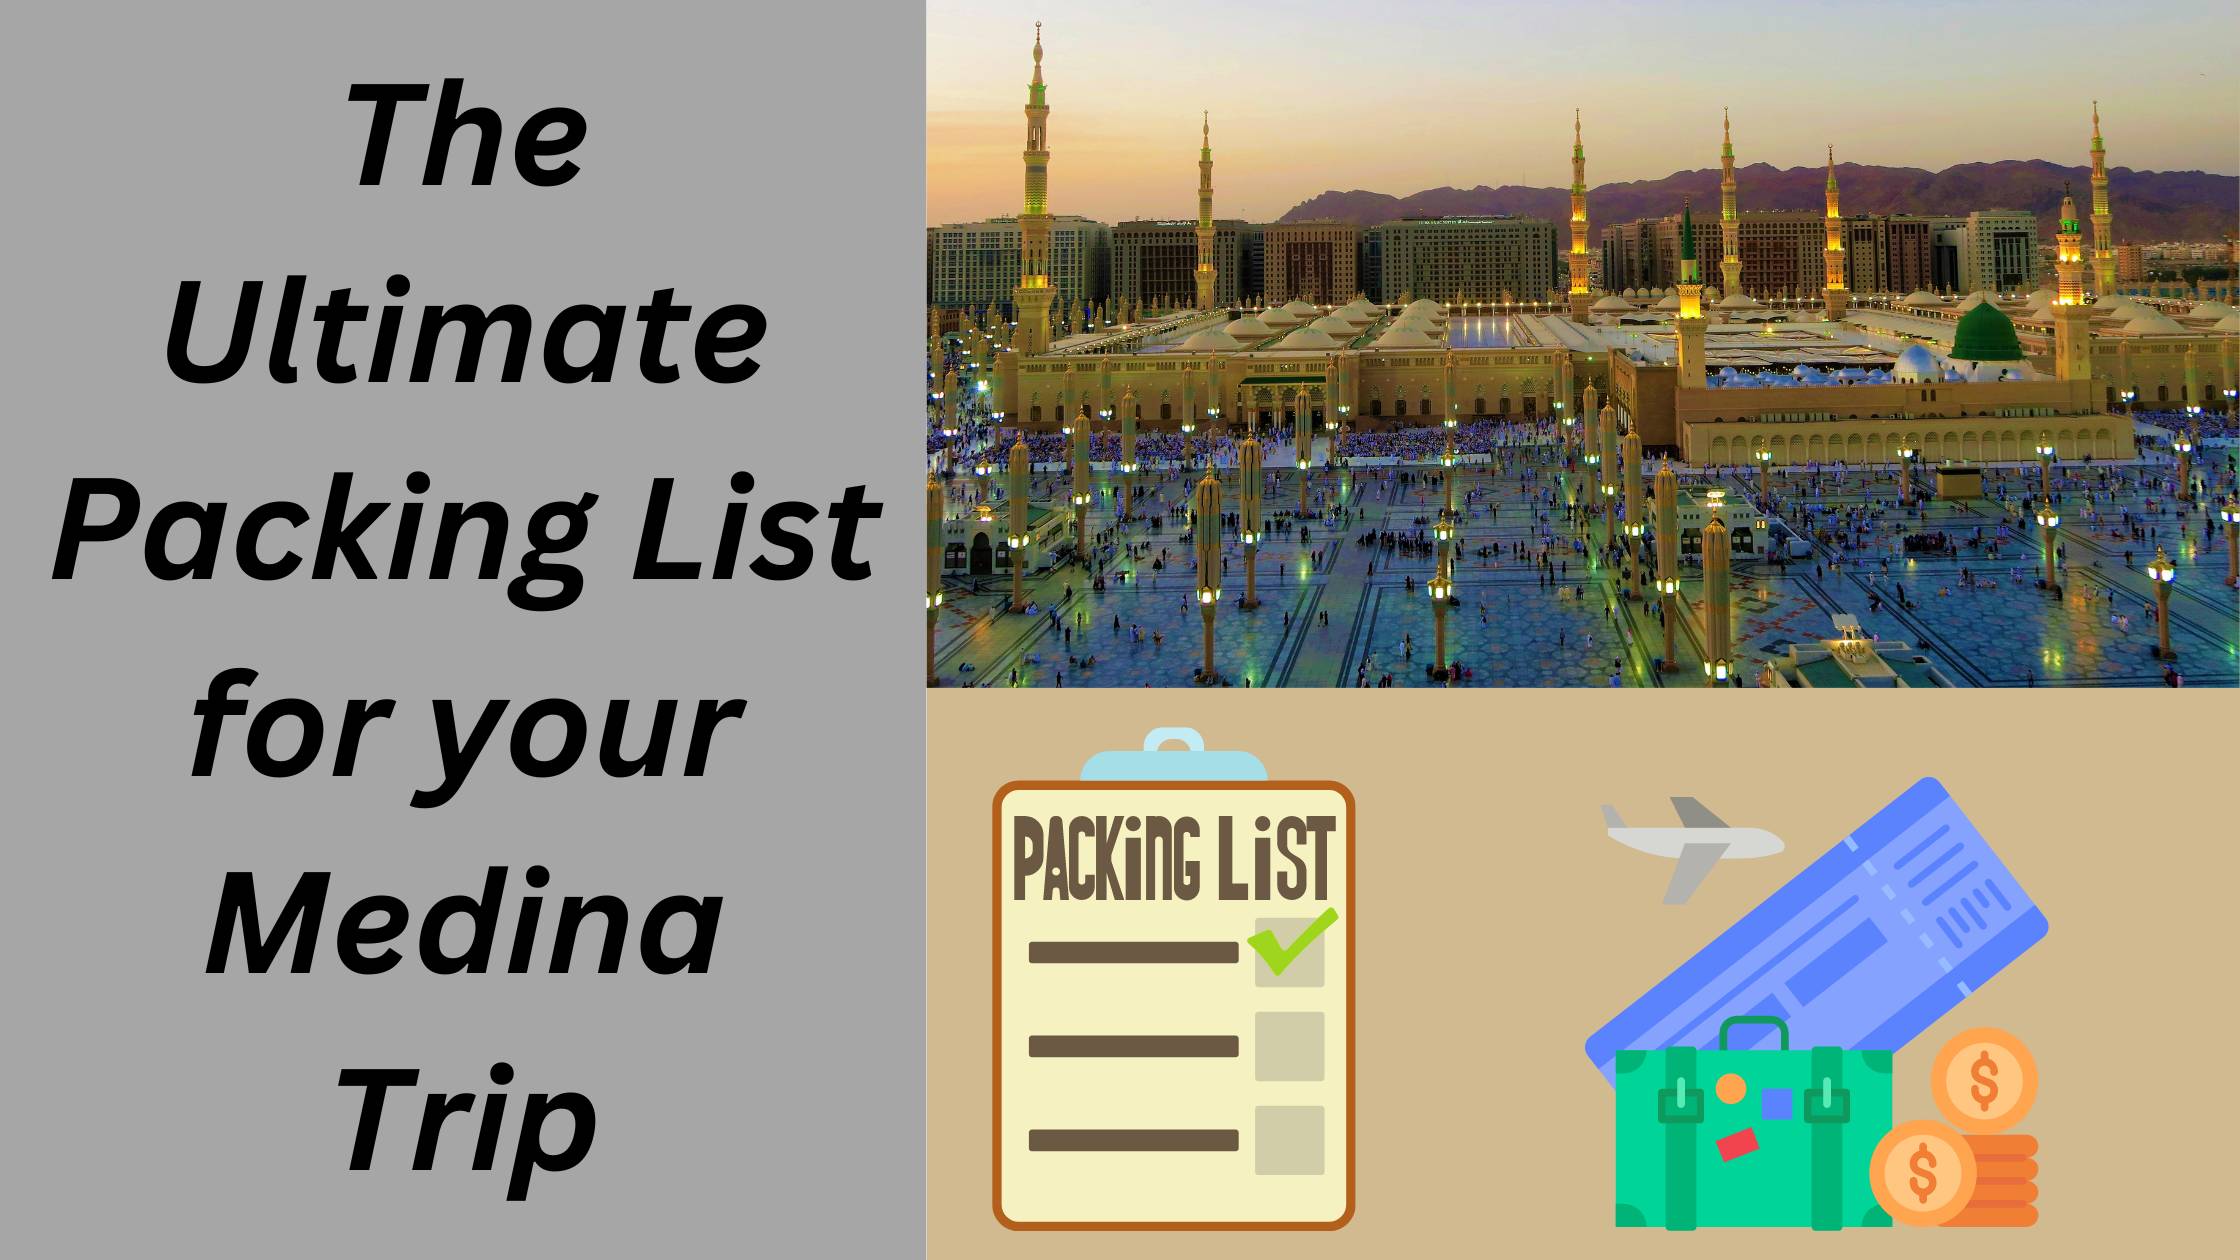 The Ultimate Packing List for your Medina Trip | Article Terrain